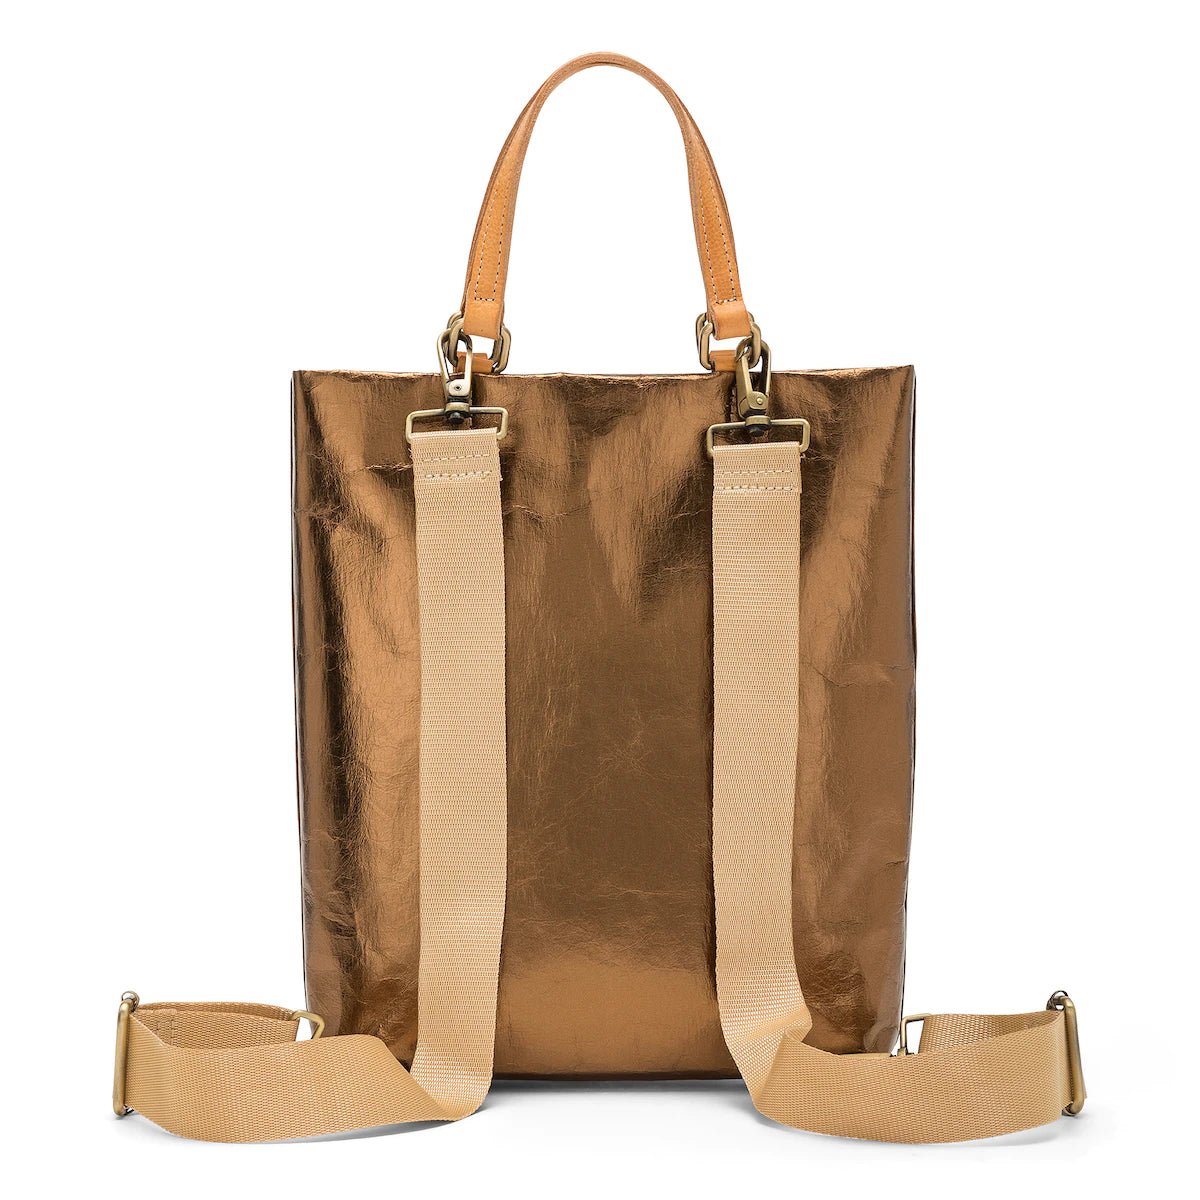 A rectangular tote bag backpack is shown from the back angle. It features two top tote handles, and two adjustable canvas shoulder straps. It is metallic bronze in colour.